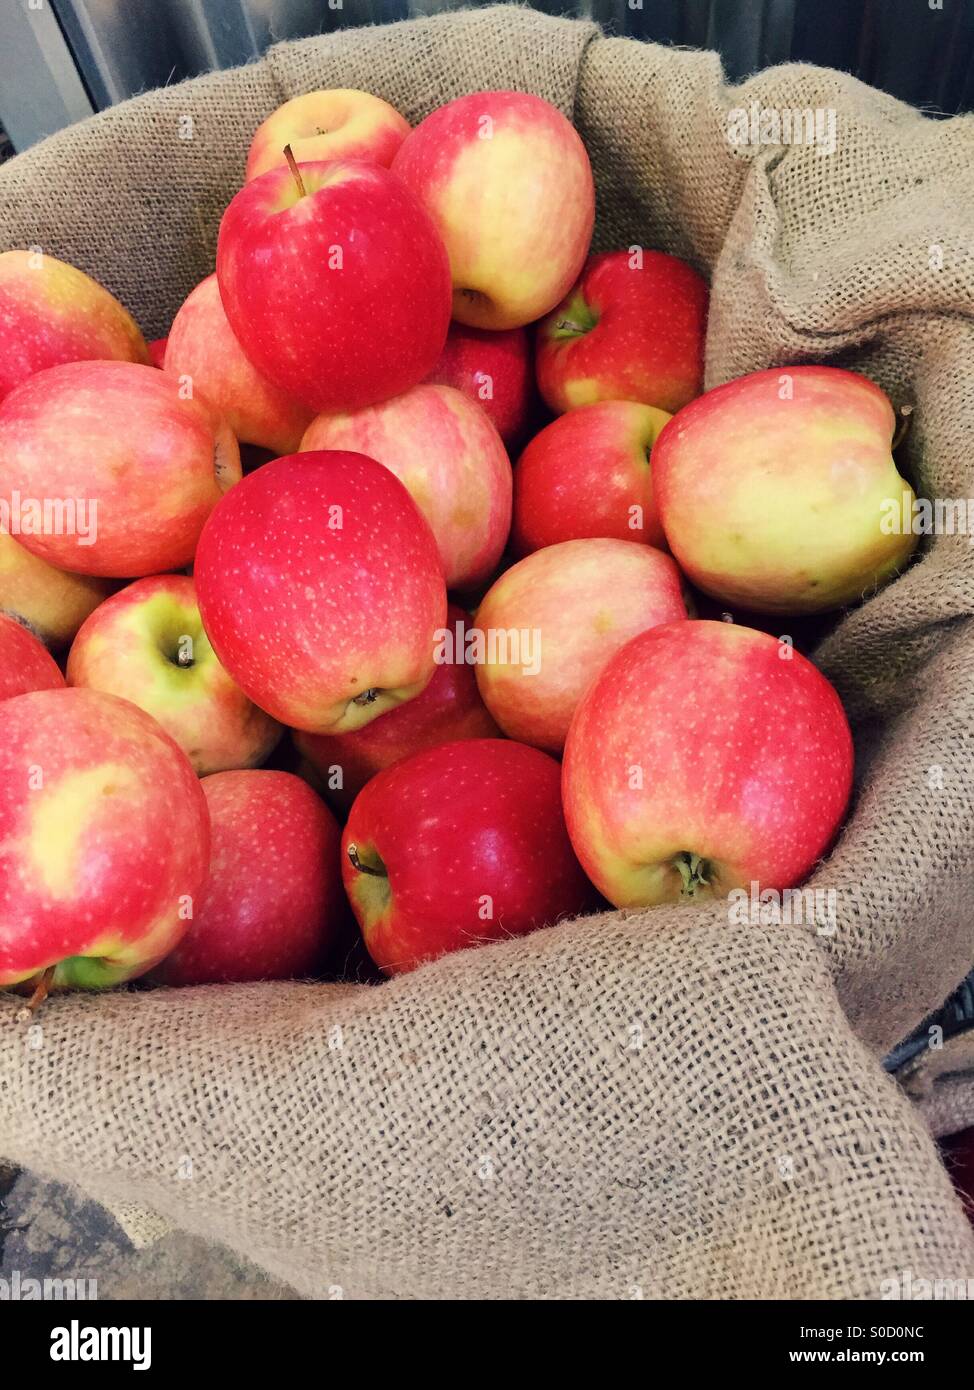 https://c8.alamy.com/comp/S0D0NC/fresh-organic-pink-lady-apples-for-sale-in-a-farm-market-stall-S0D0NC.jpg